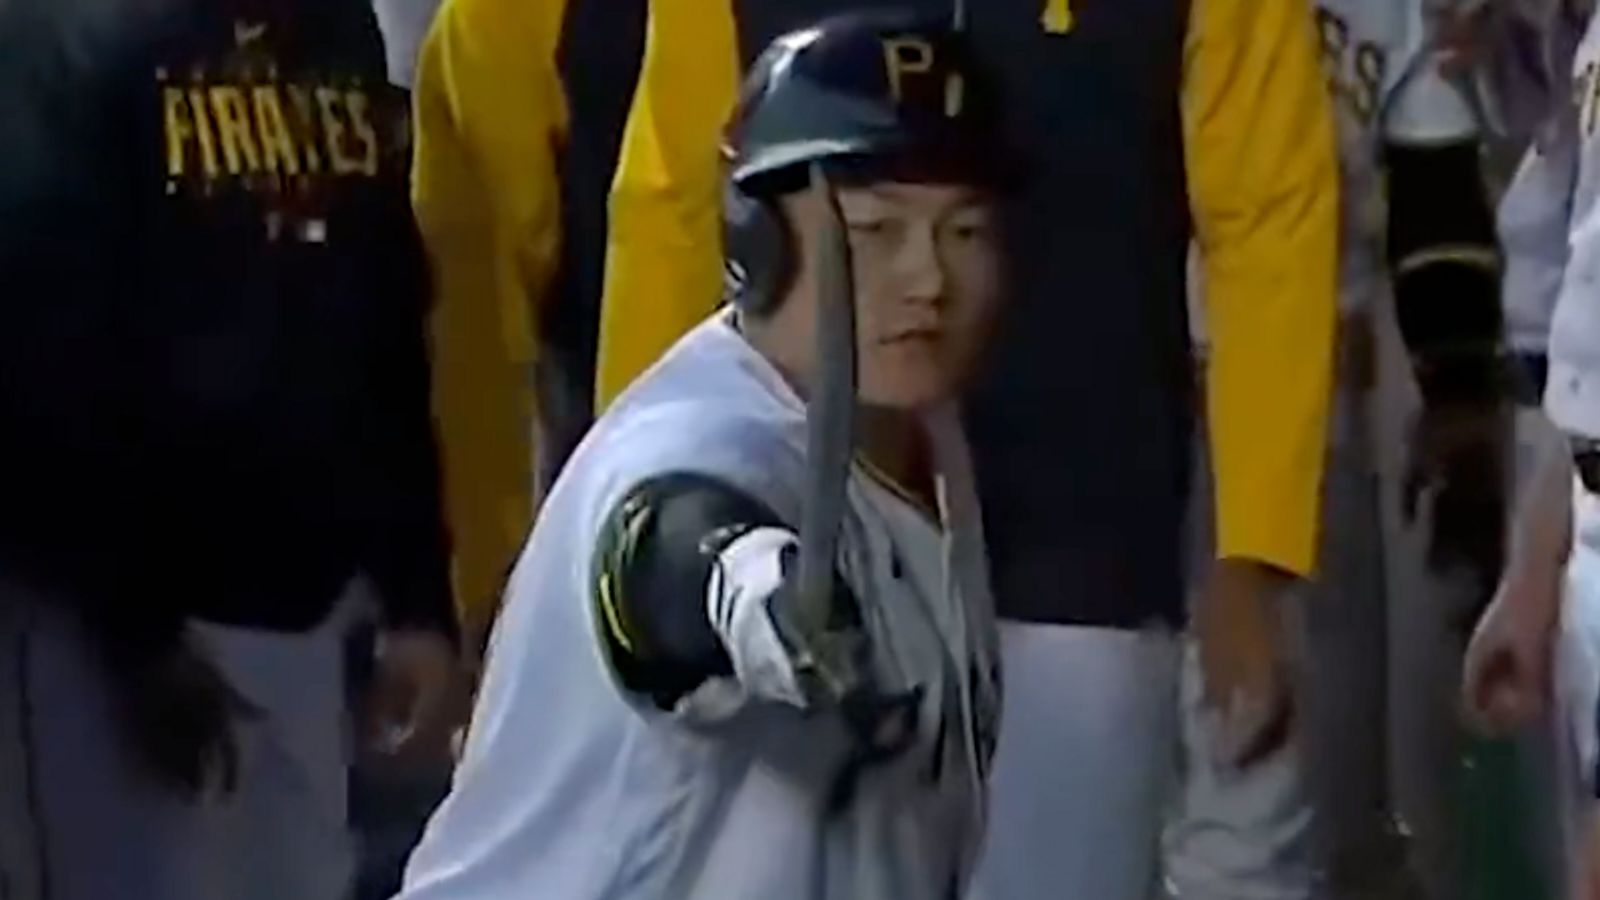 Freeze Frame: The Pirates have a sword now